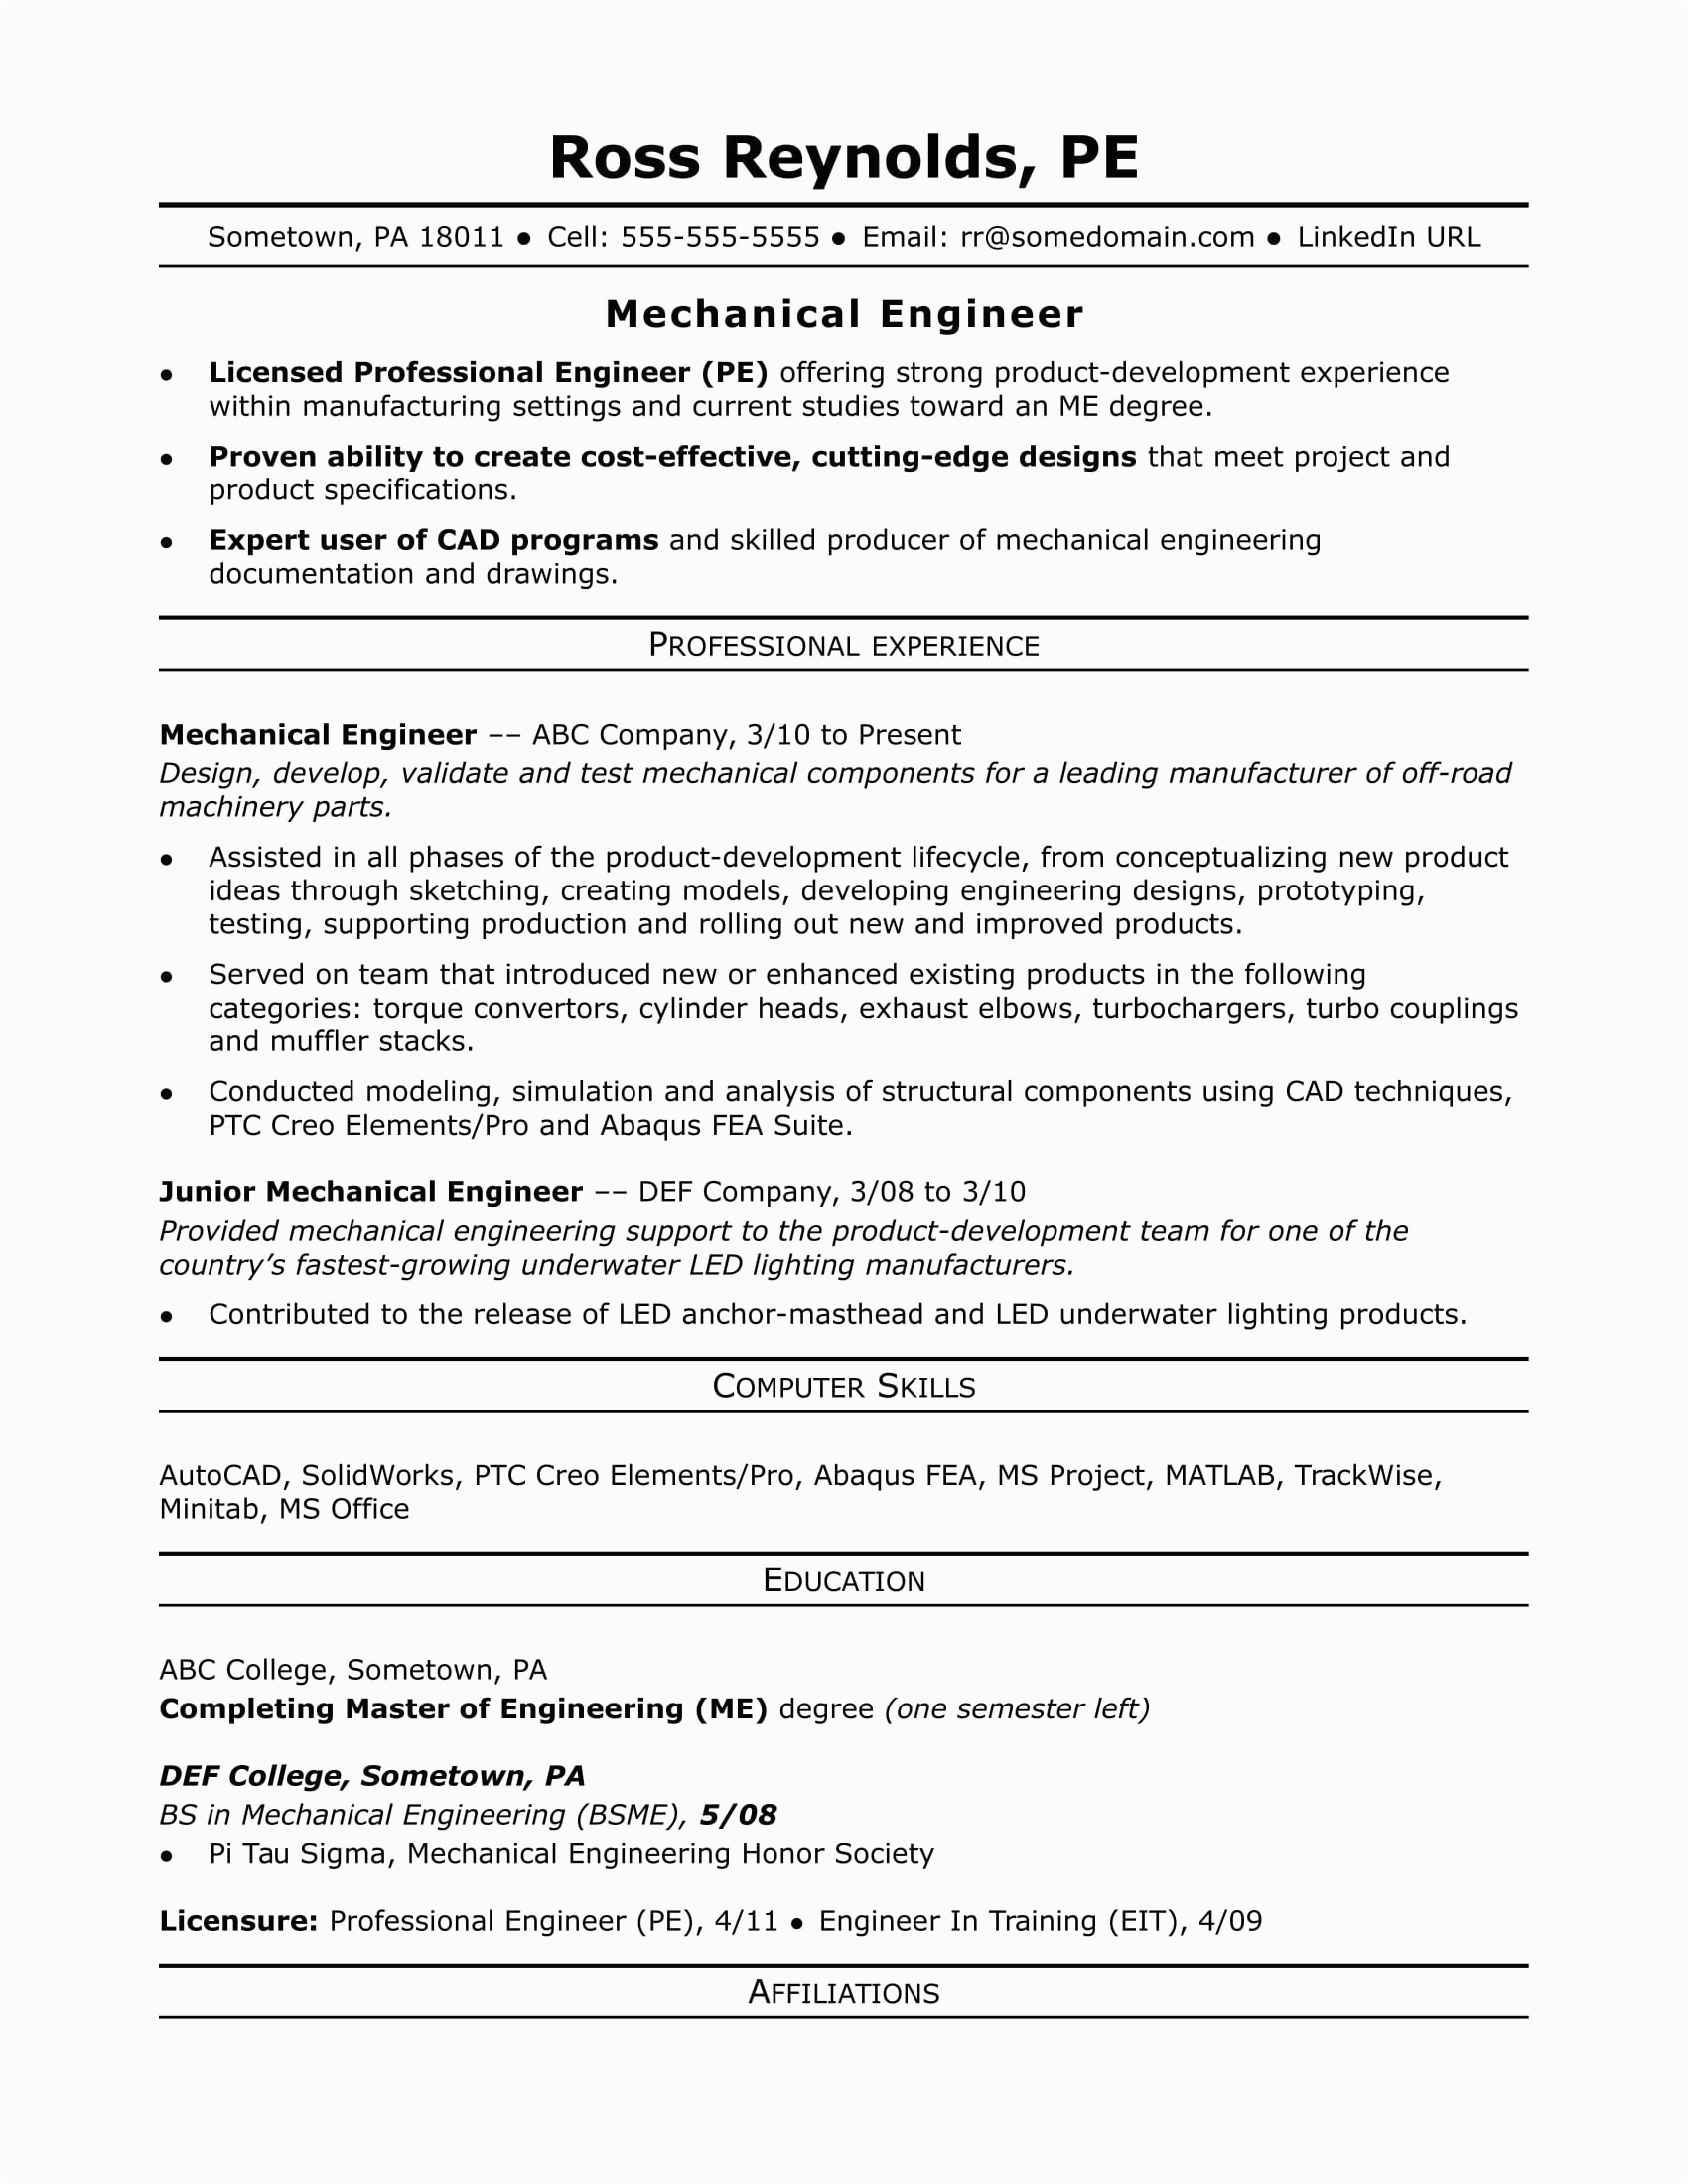 Experience Resume Sample for Mechanical Engineer Sample Resume for A Midlevel Mechanical Engineer